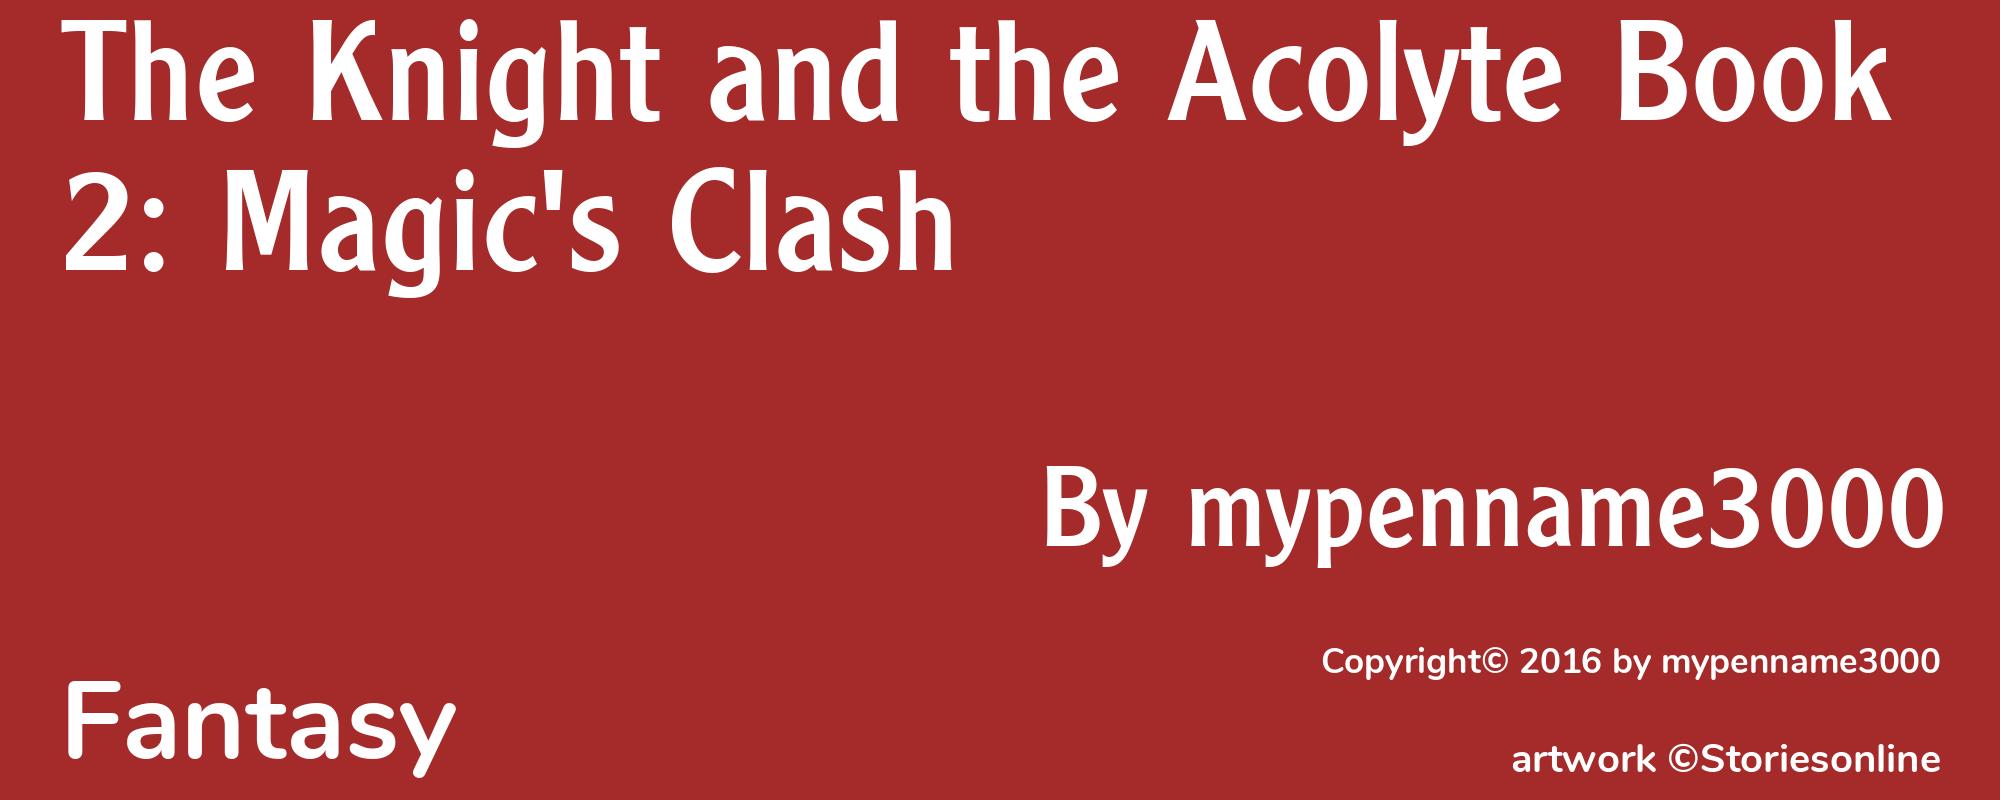 The Knight and the Acolyte Book 2: Magic's Clash - Cover